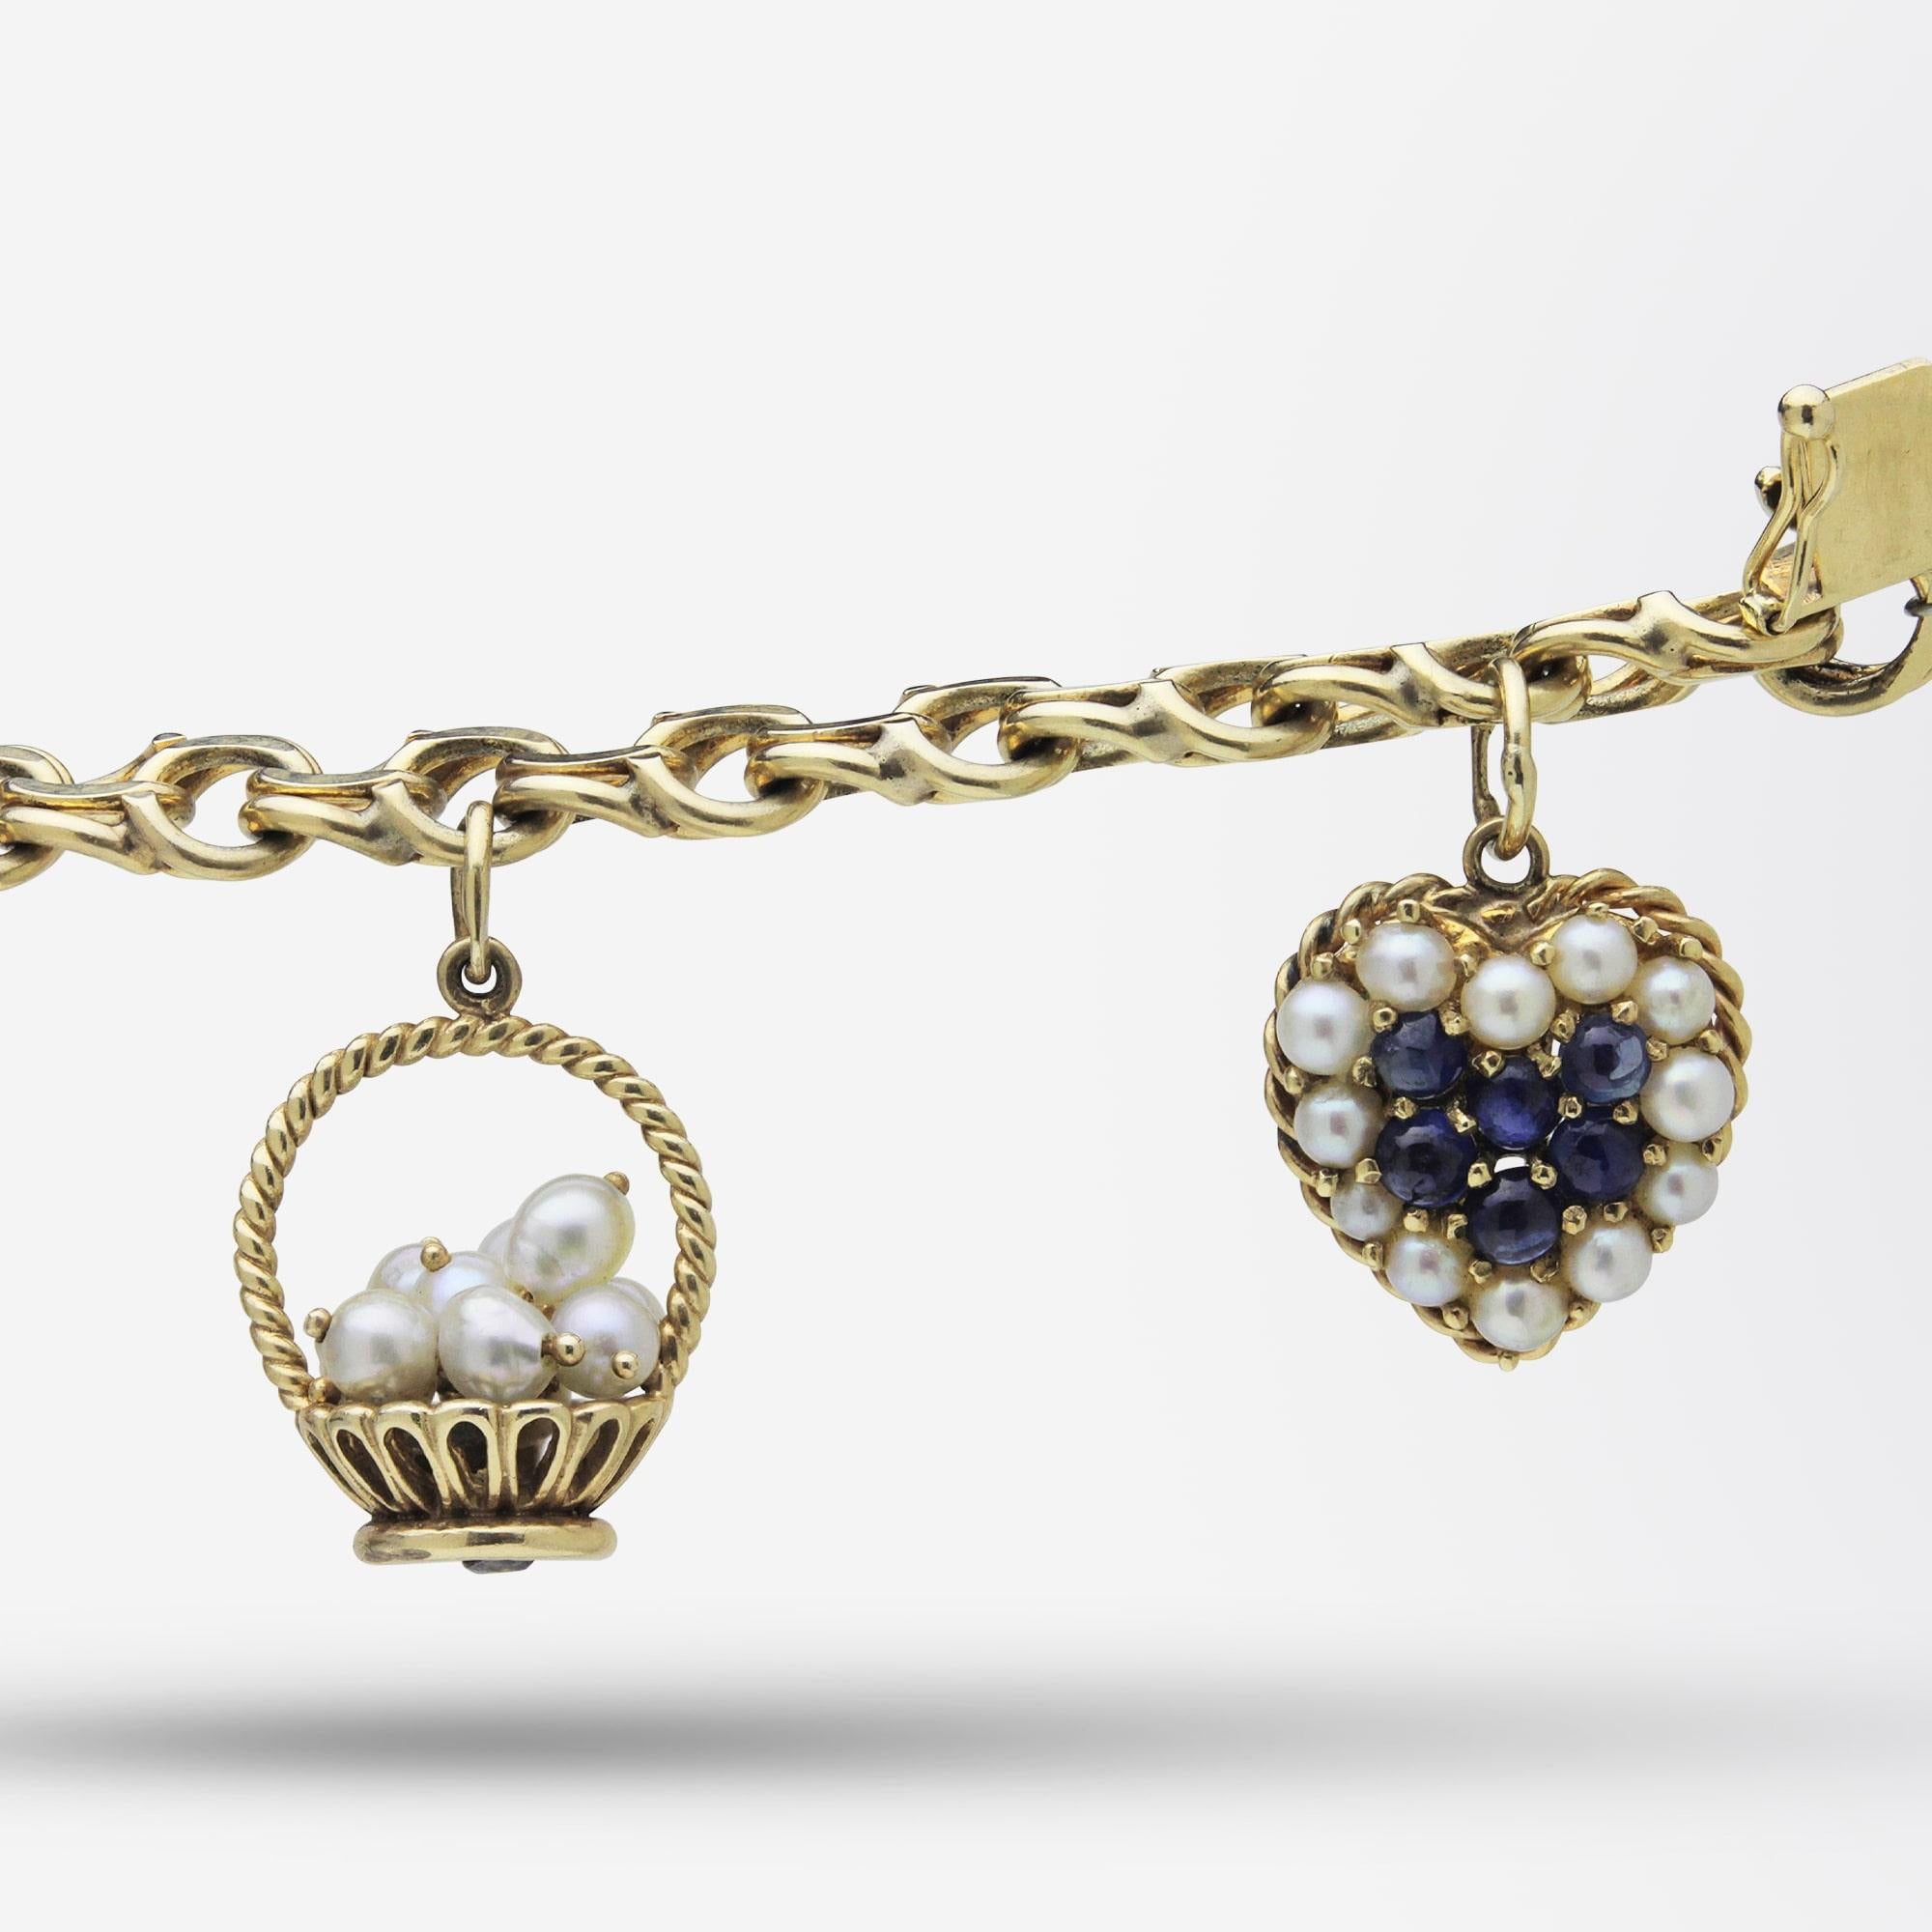 Cabochon 14 Karat Yellow Gold Charm Bracelet with Pearls and Ceylon Sapphires